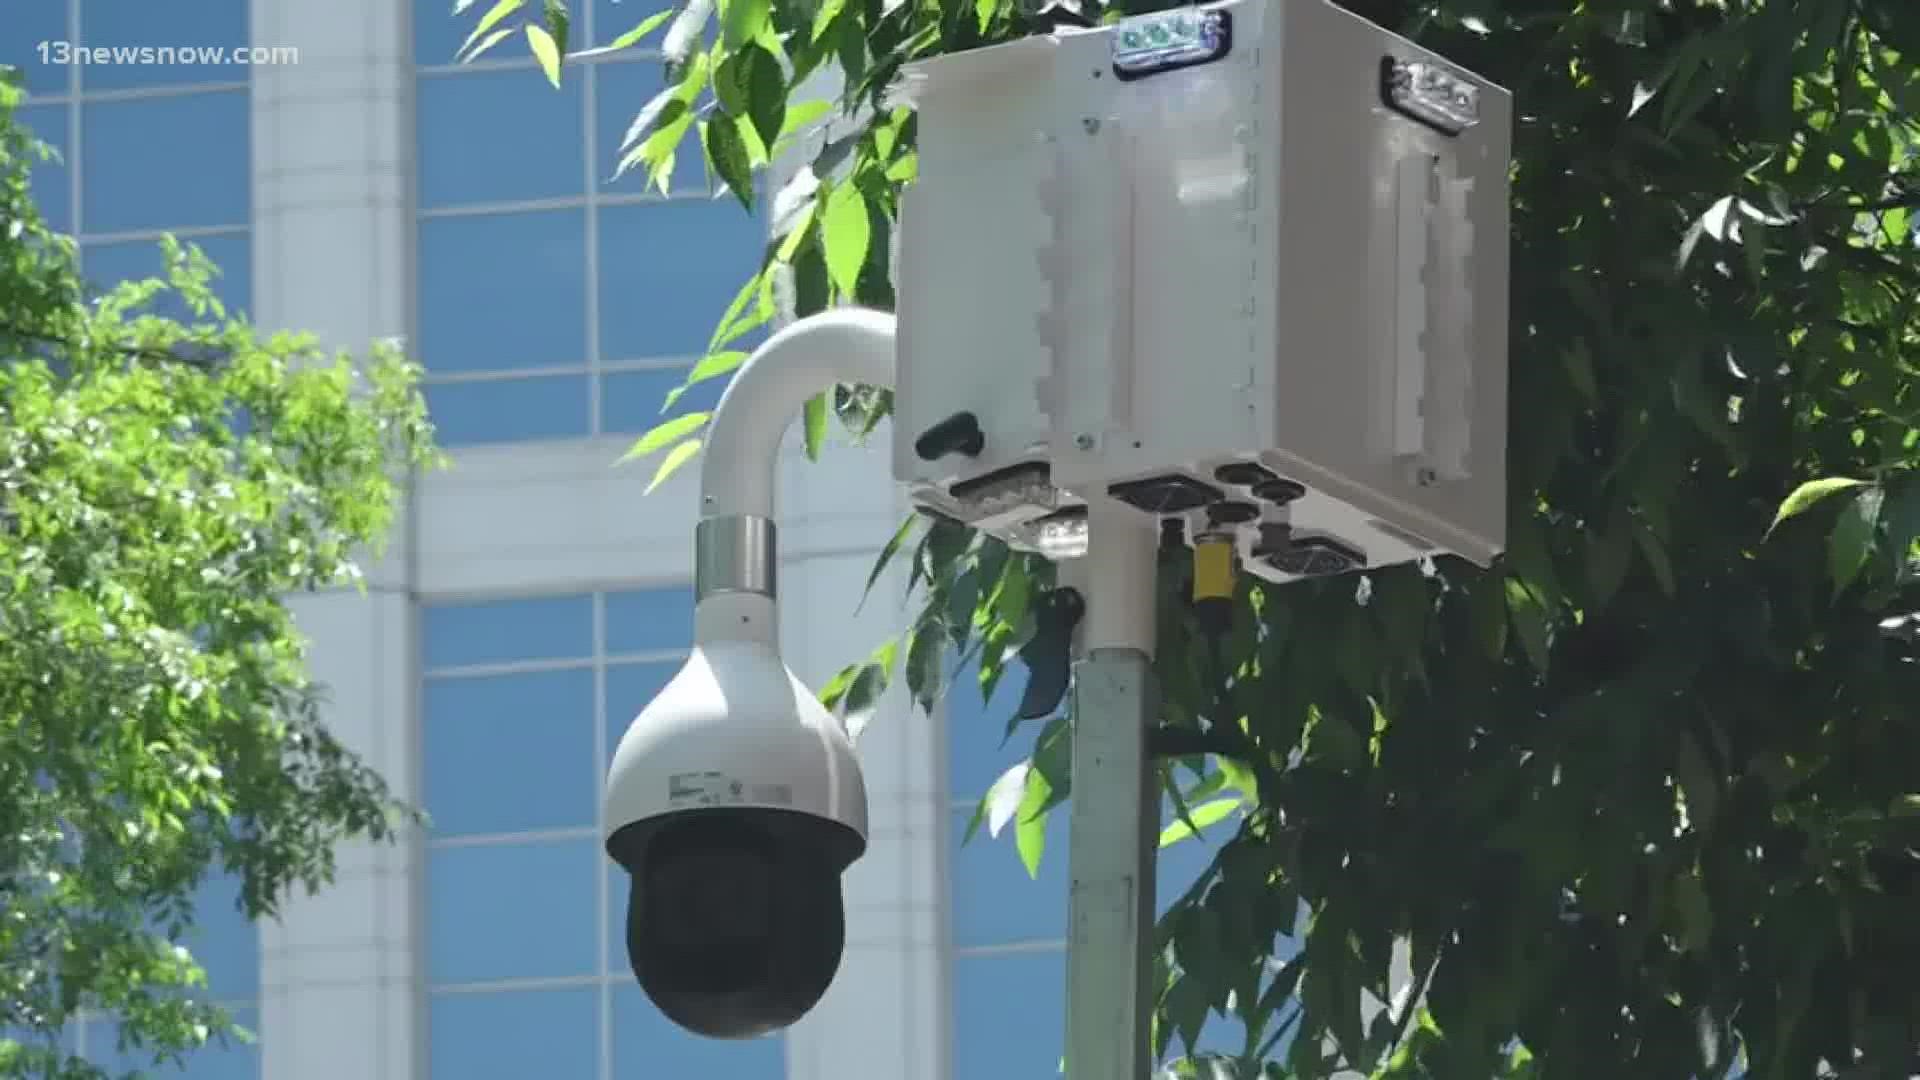 Norfolk police said a total of six cameras are parked in the downtown area right now.